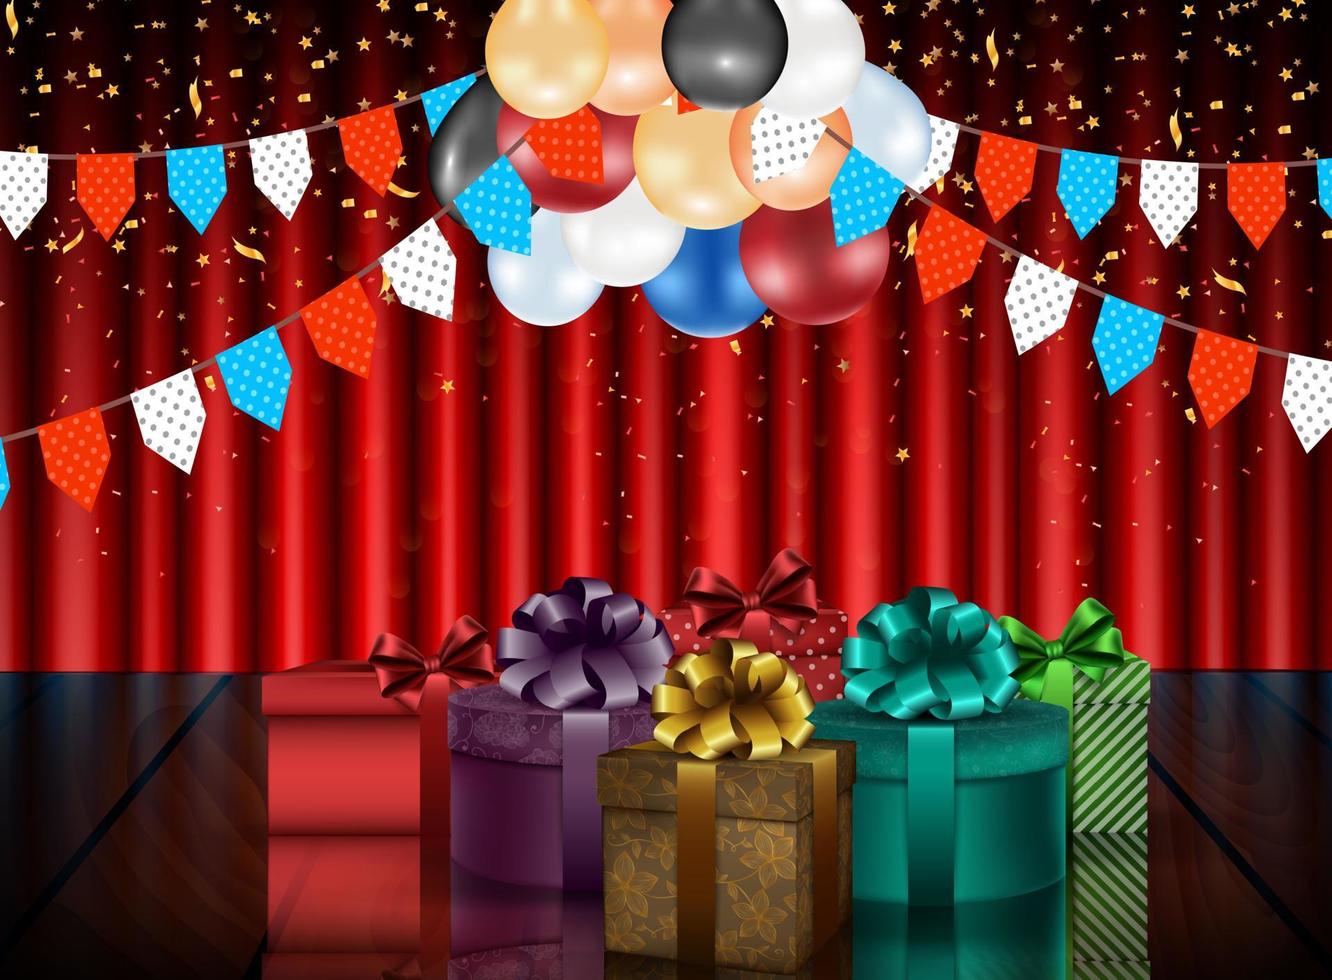 Birthday background of party with color balloons and gift boxes on curtain background vector